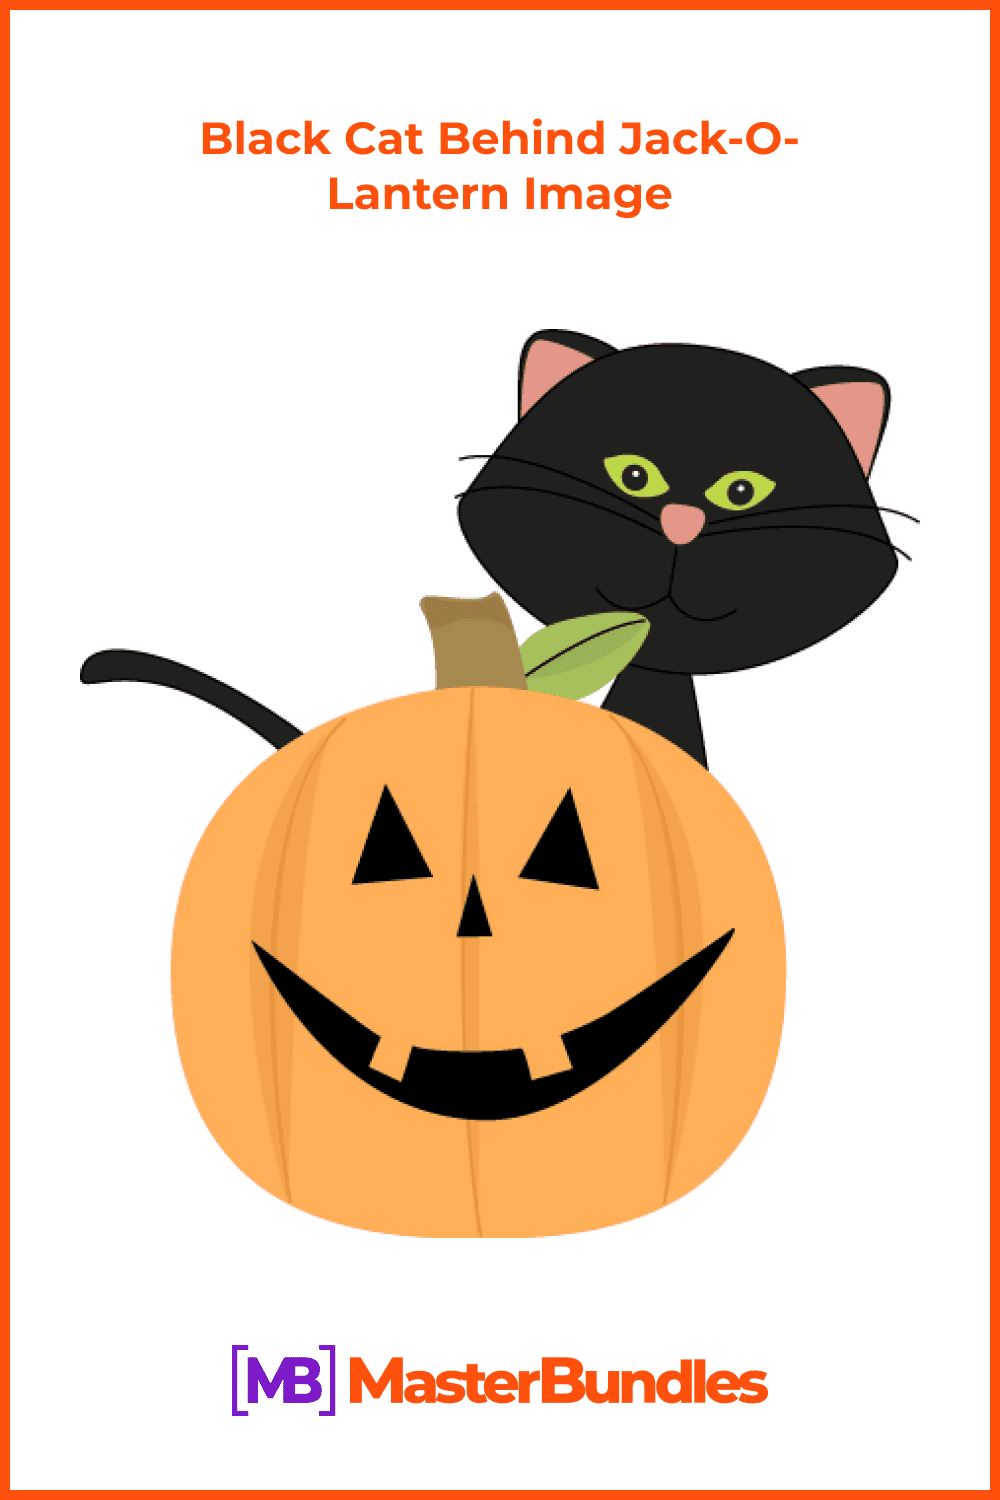 Black cheerful cat with a cool pumpkin.